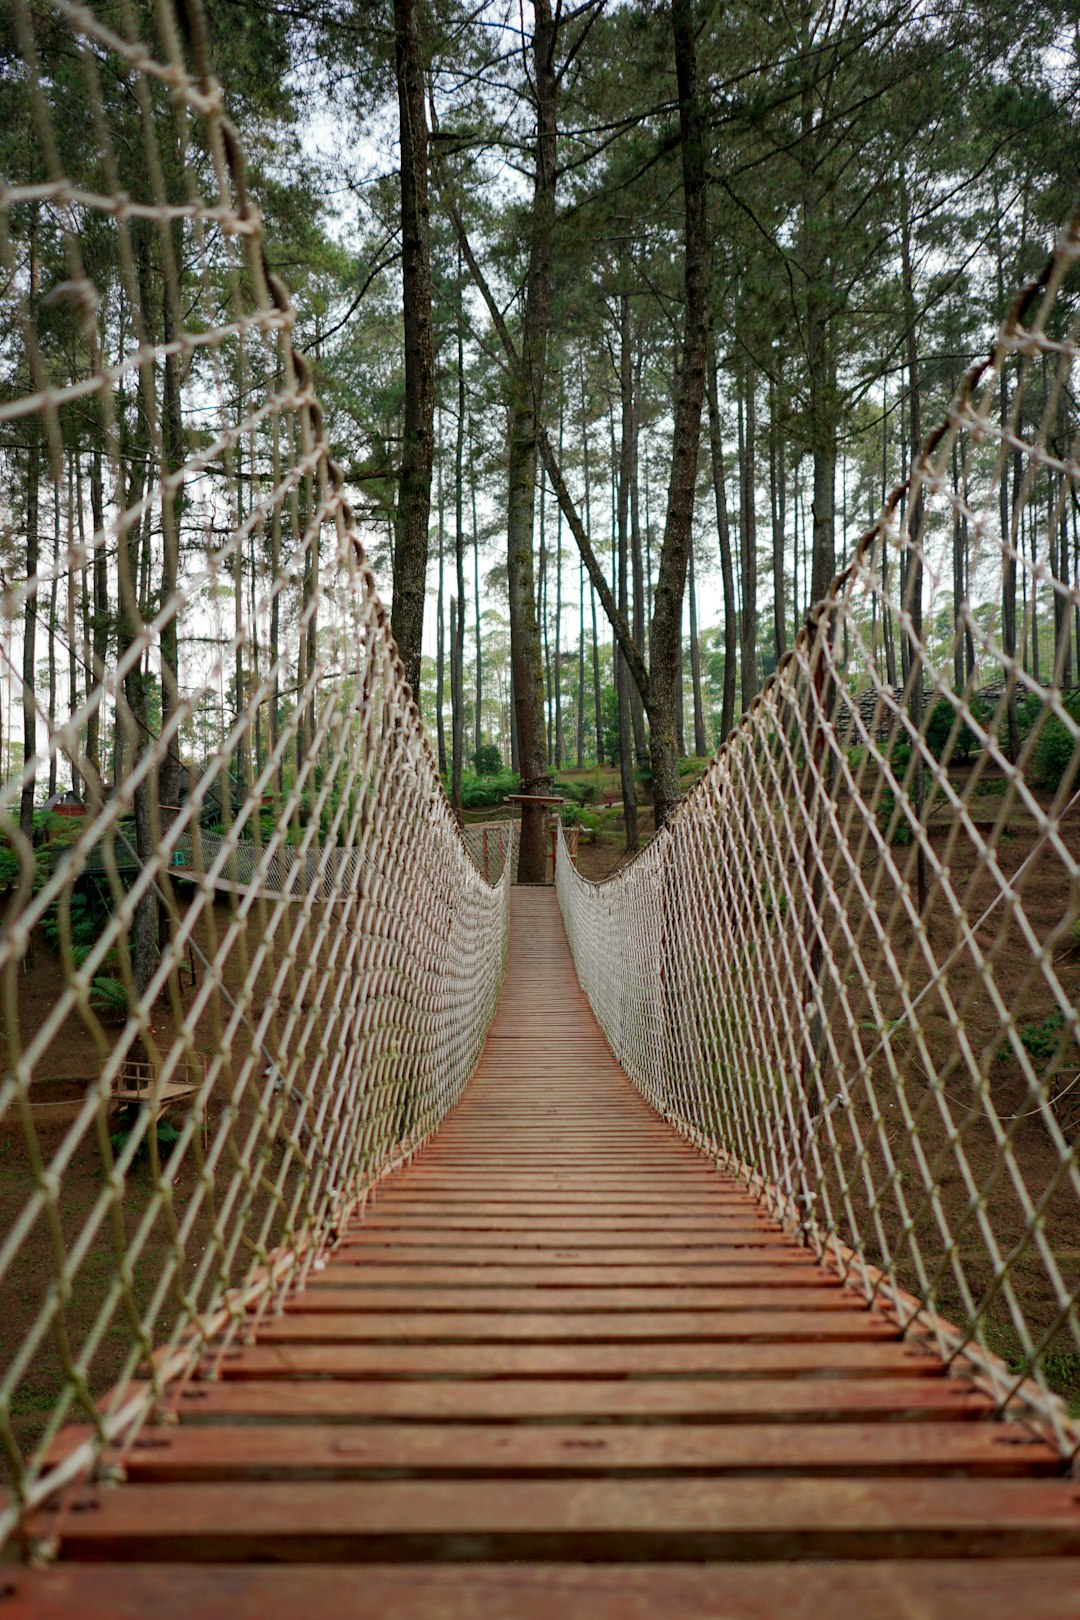 travelers stories about Rope bridge in Tourism Park ORCHID FOREST, Indonesia